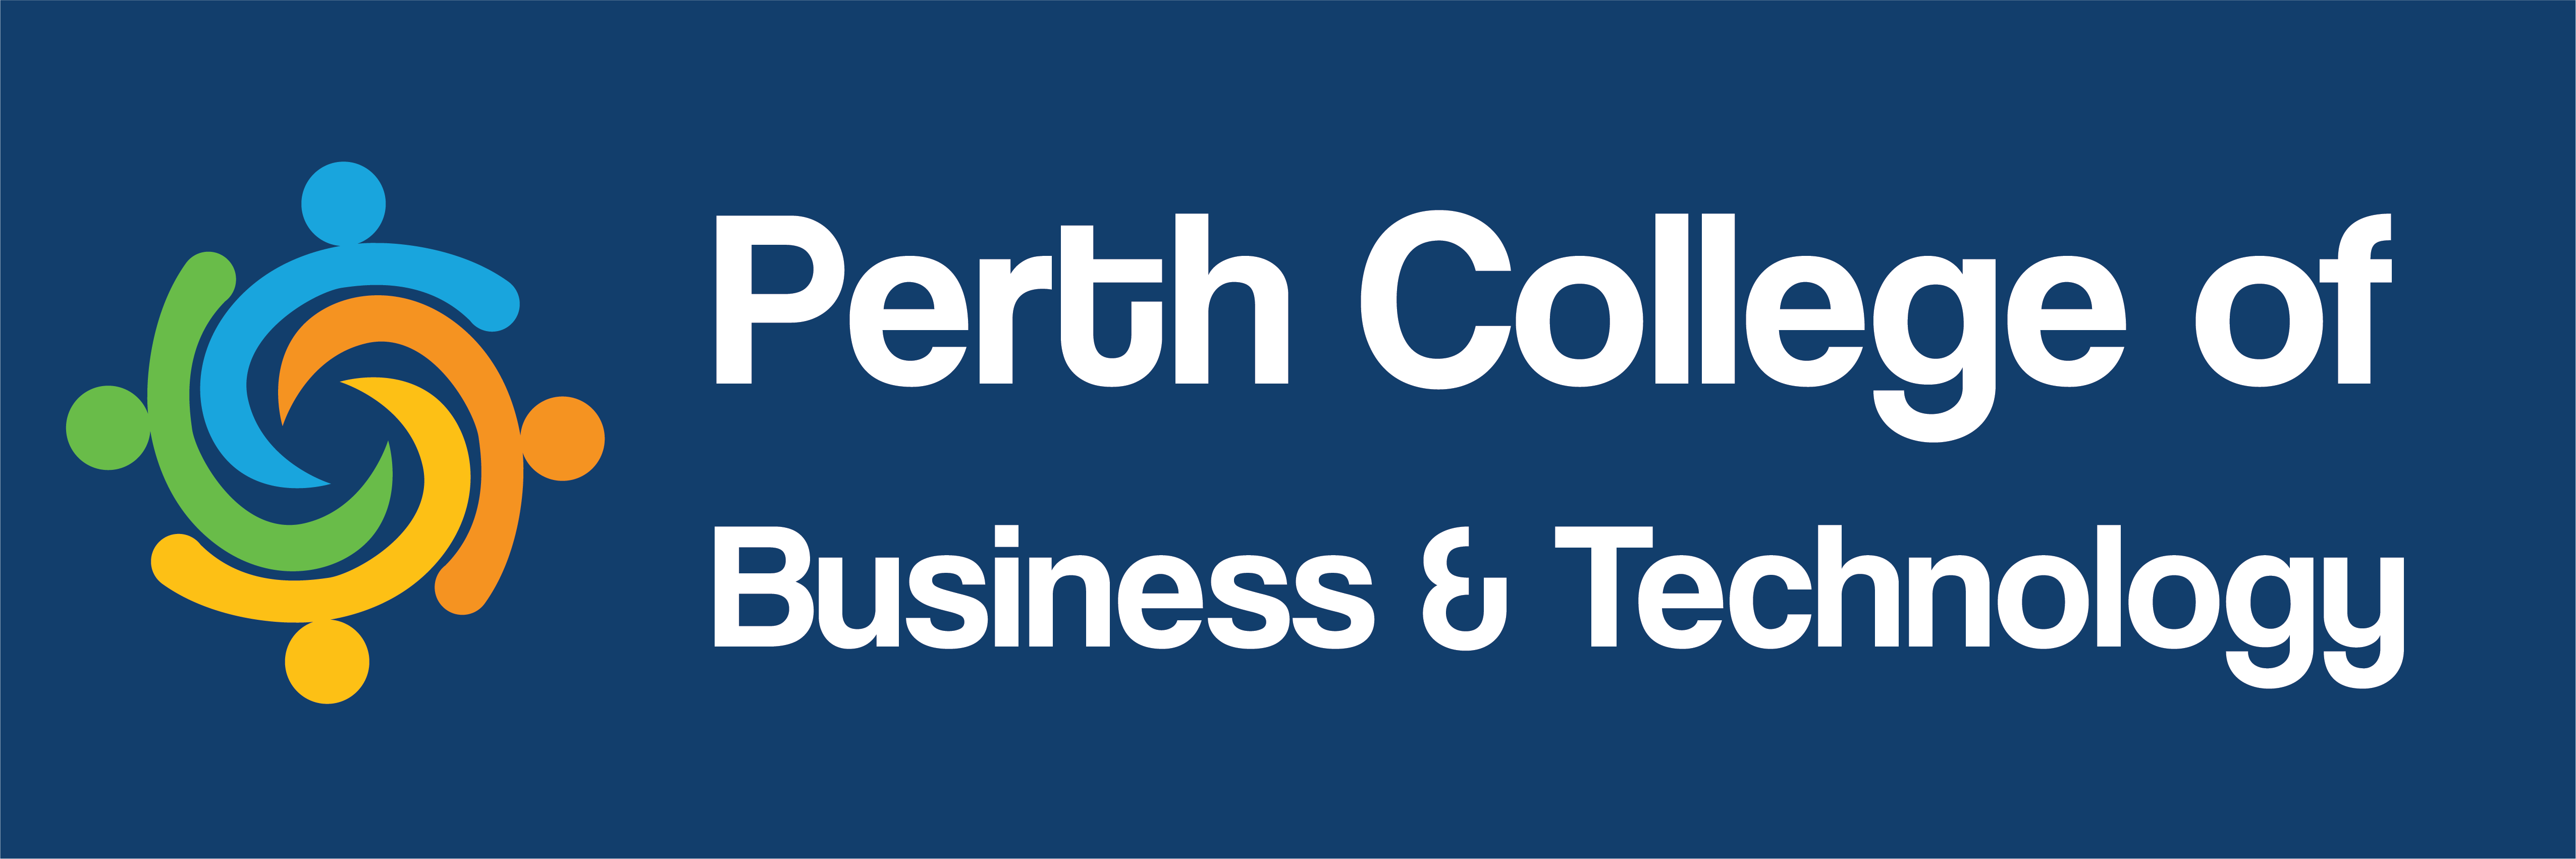 Perth College of Business and Technology Pty Ltd- PCBT